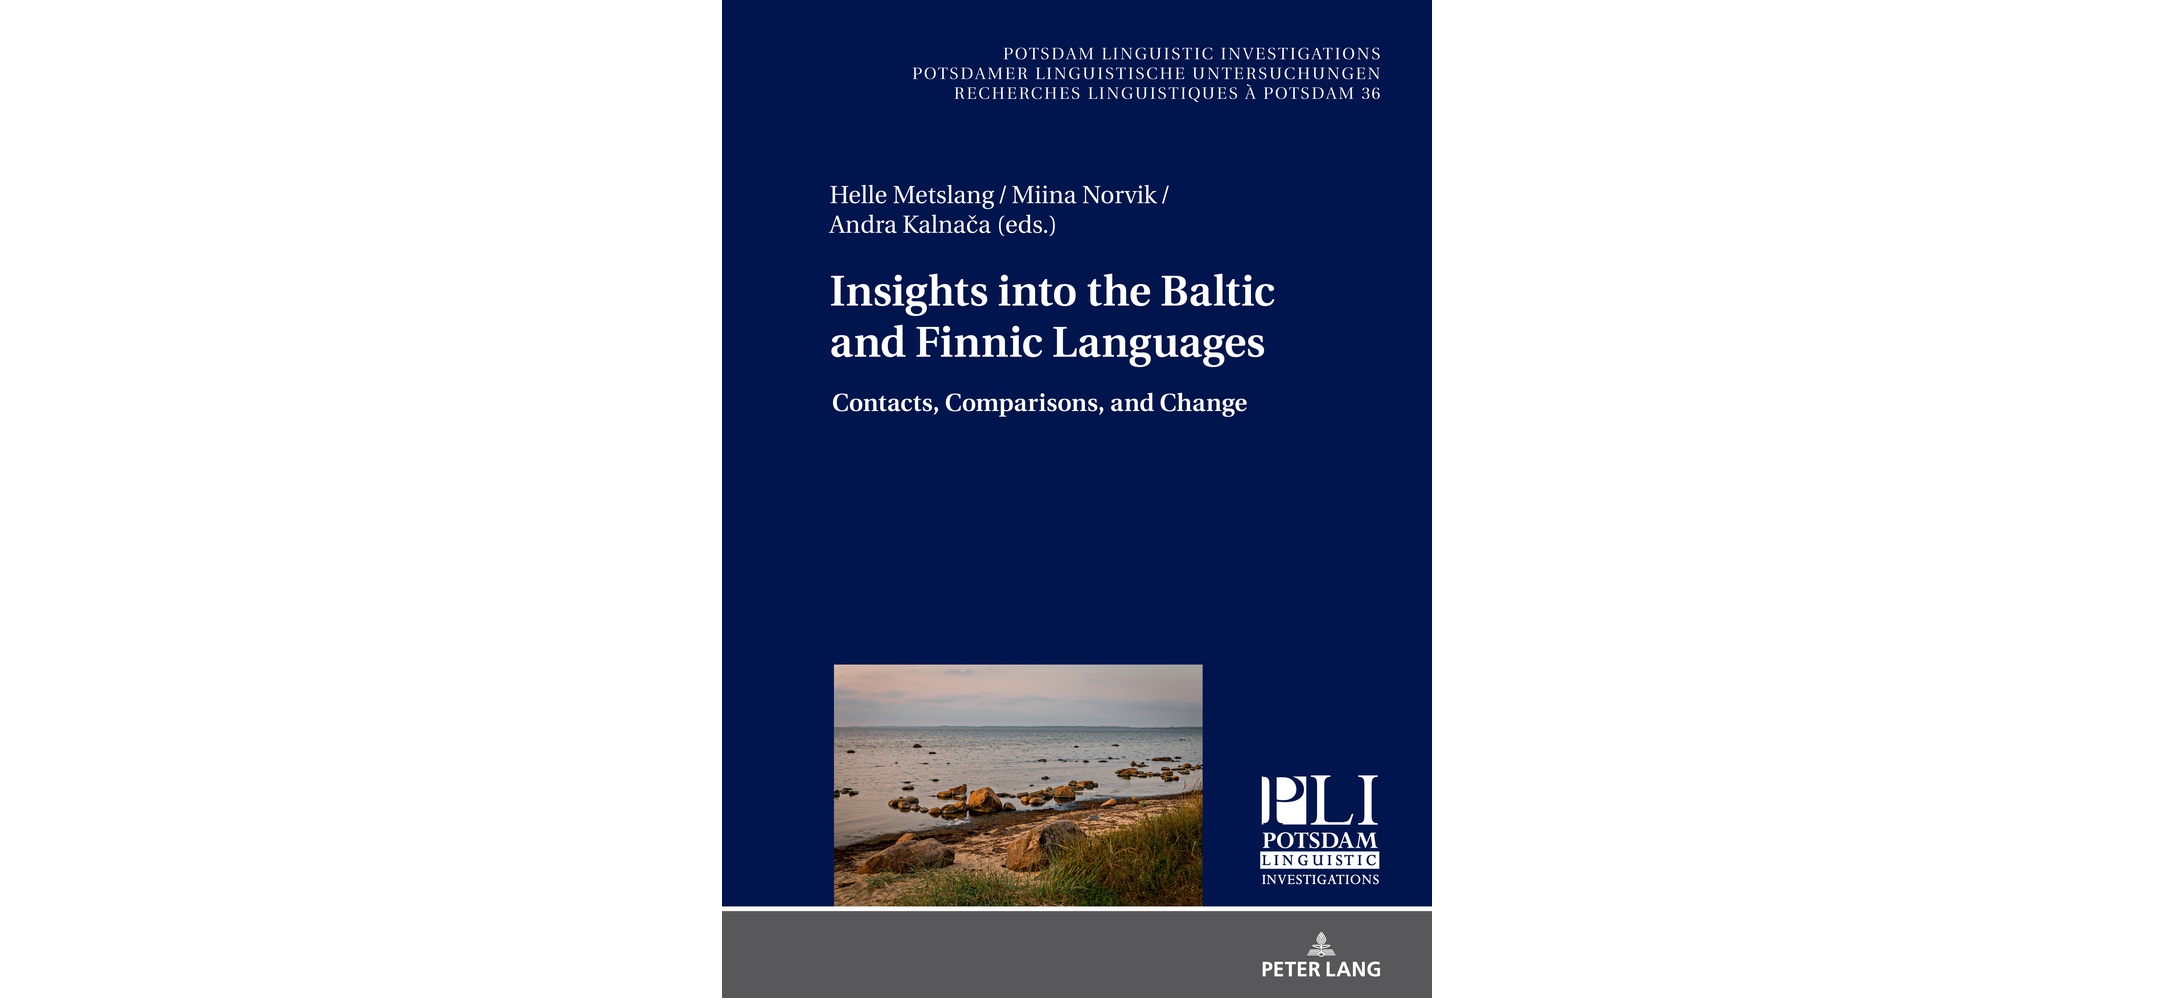 Grāmata "Insights into the Baltic and Finnic Languages. Contacts, Comparisons, and Change" 